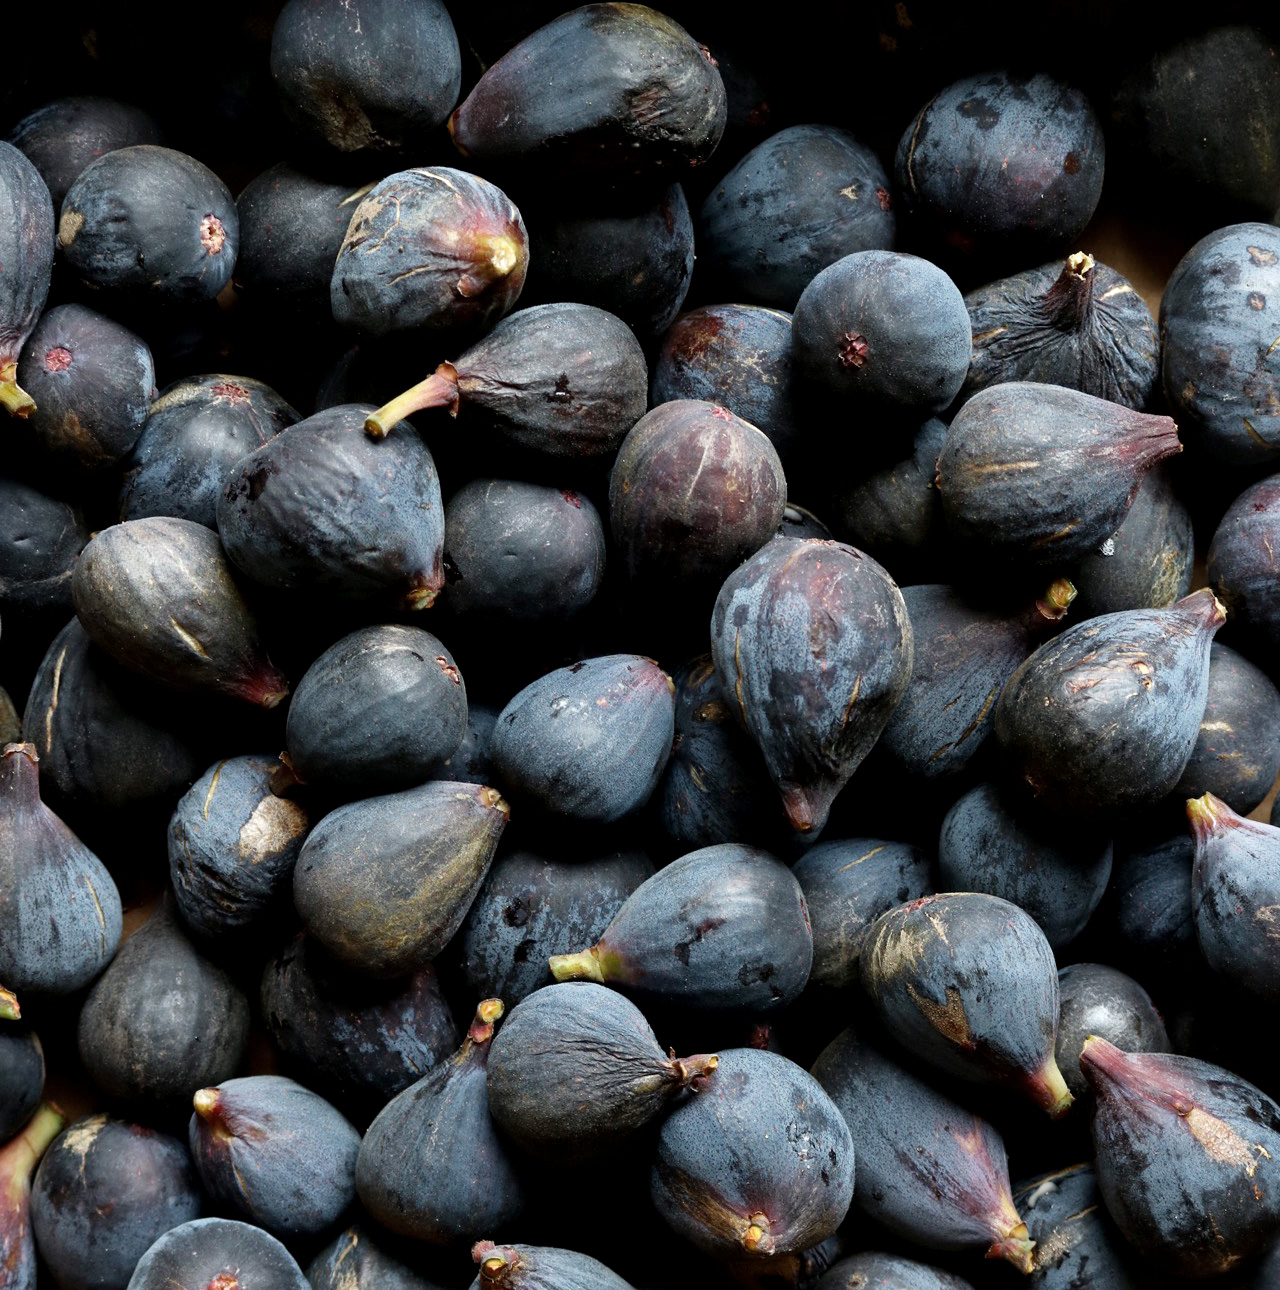 Close up photo of a bunch of figs.